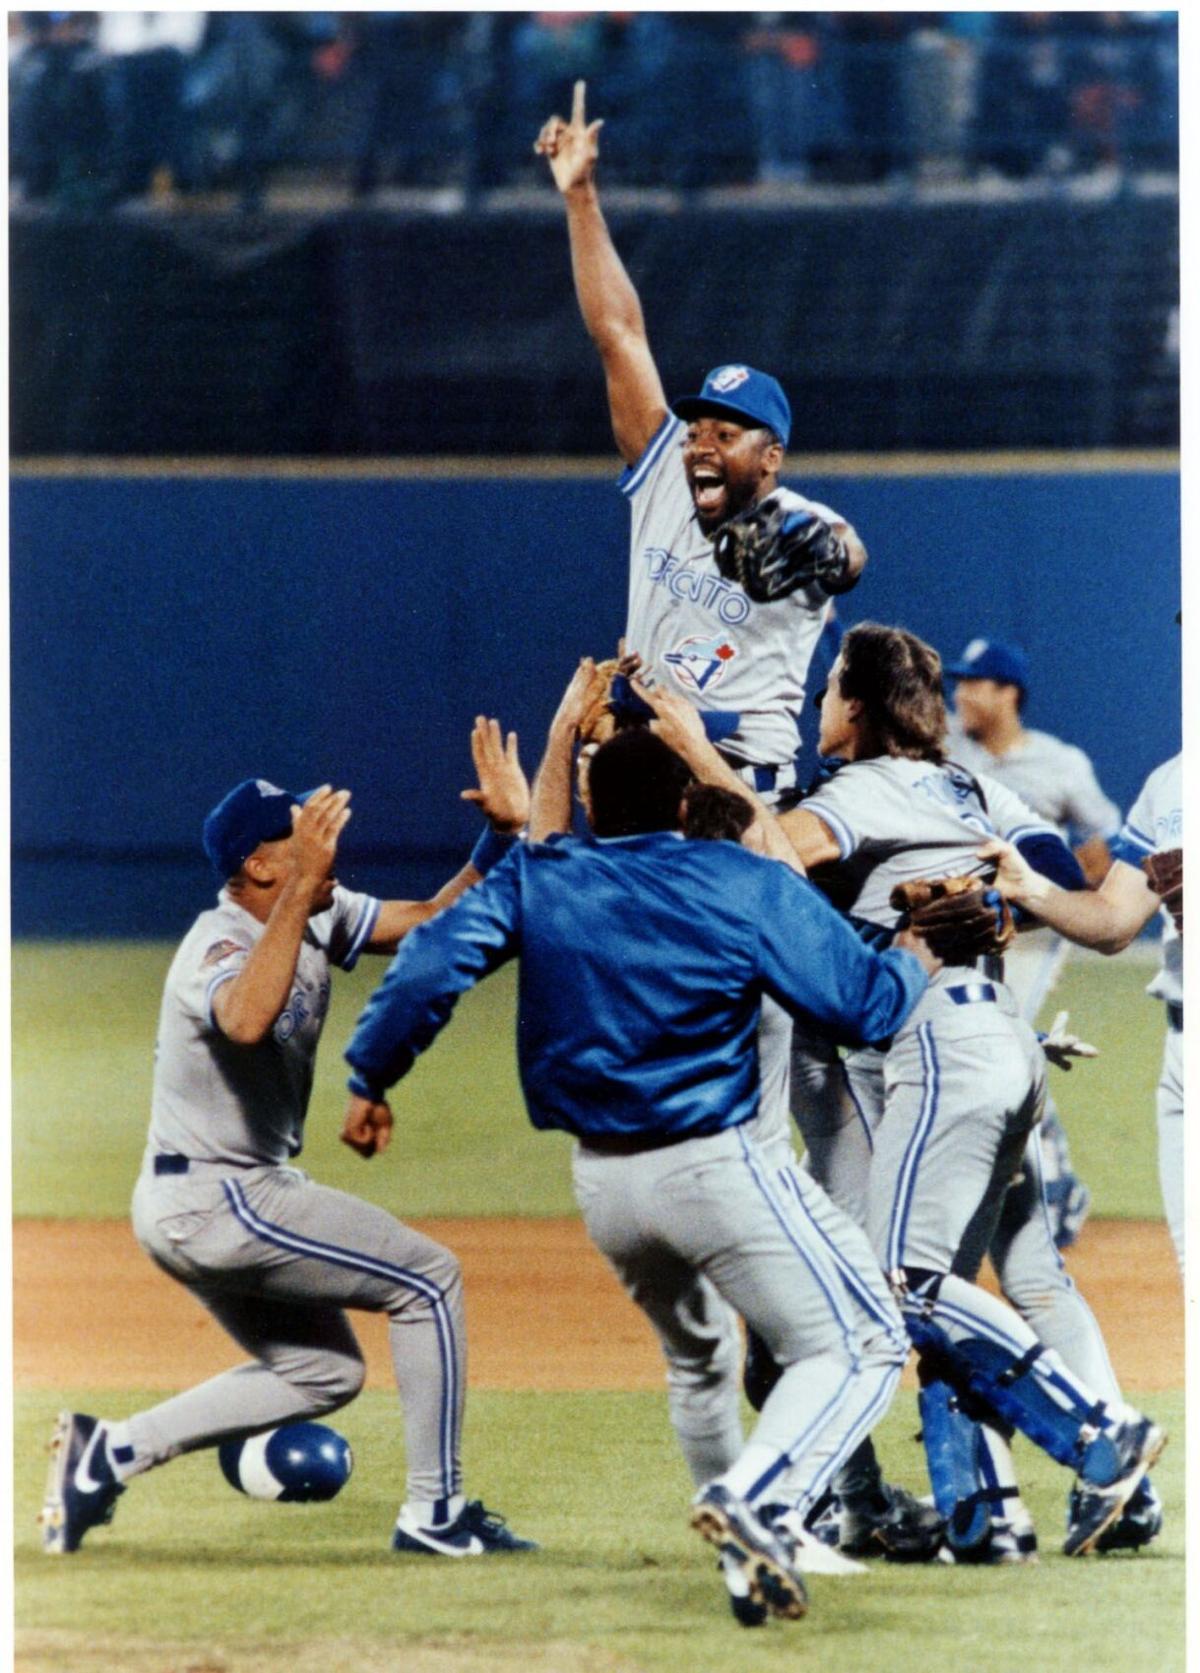 2022 Blue Jays Retrospective – Pt. 1: An Opening Night for the